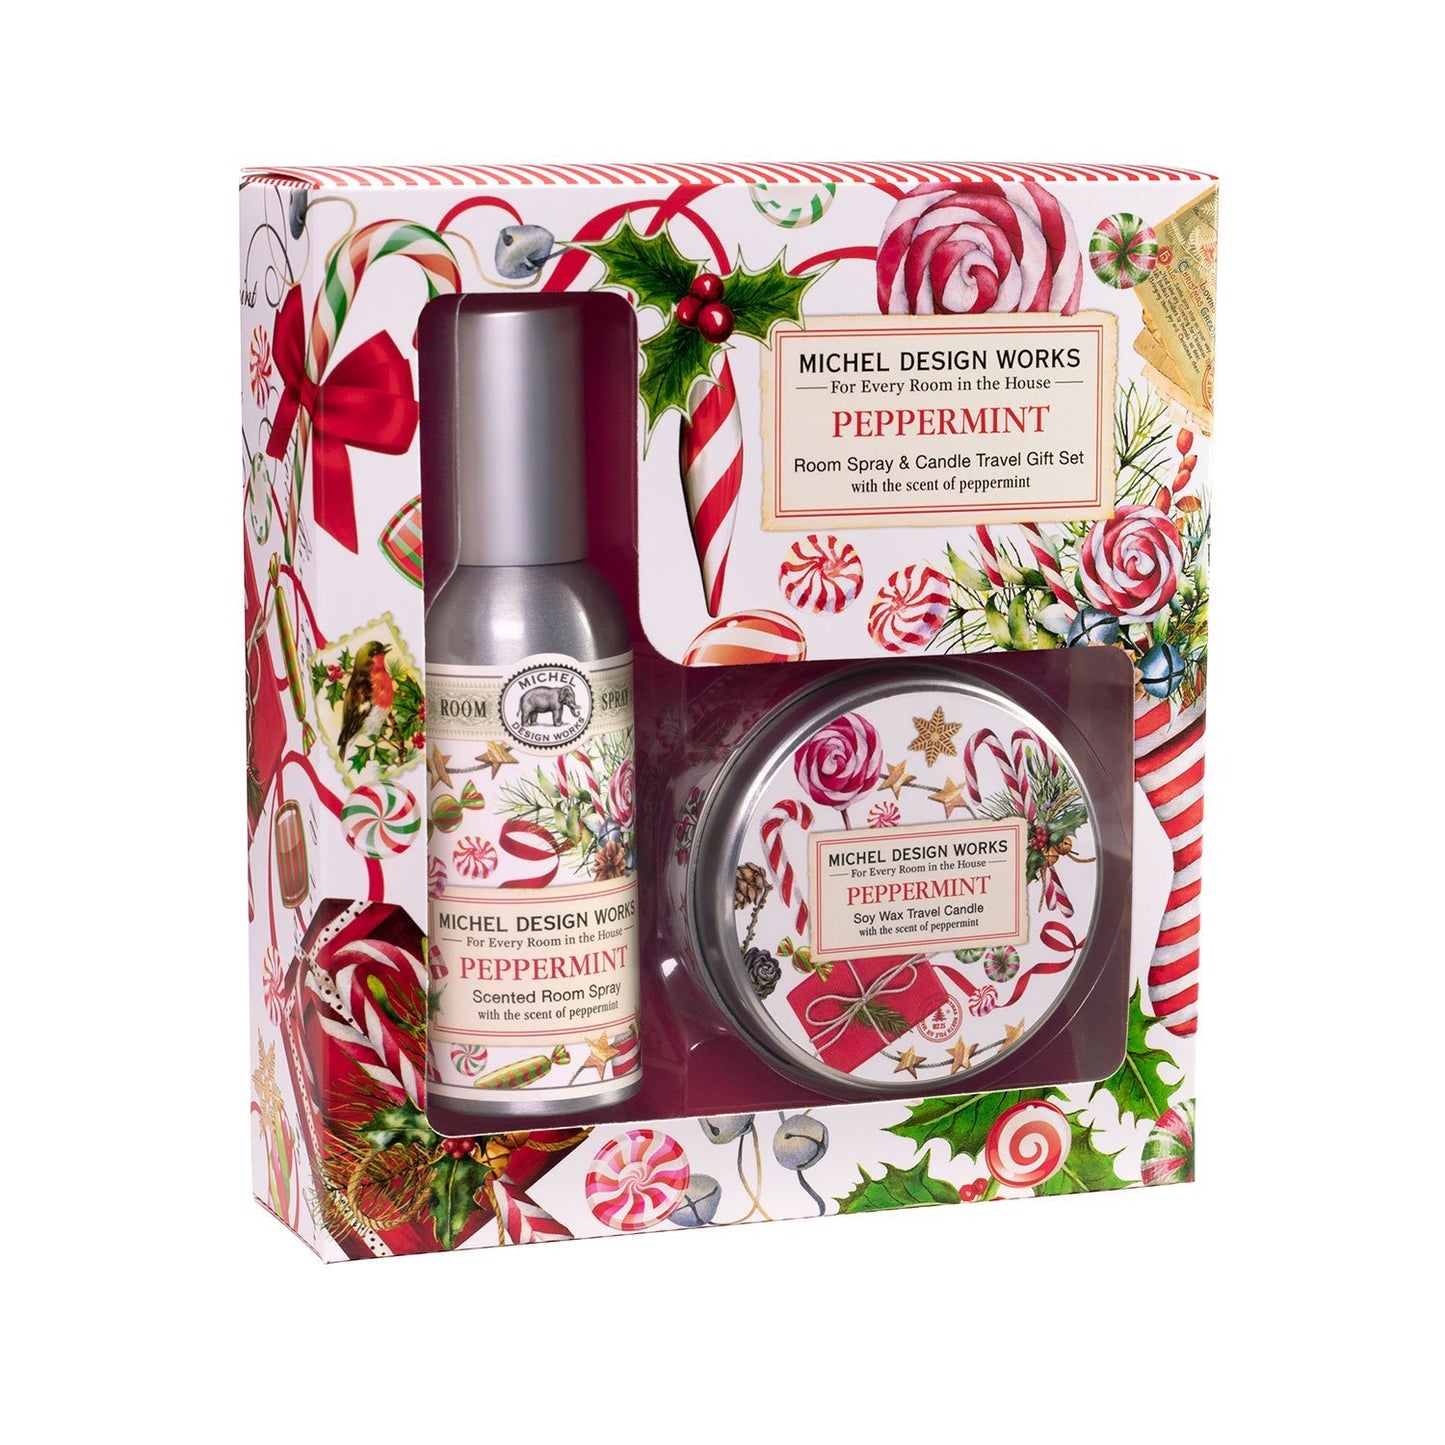 Peppermint Room Spray & Travel Candle Set